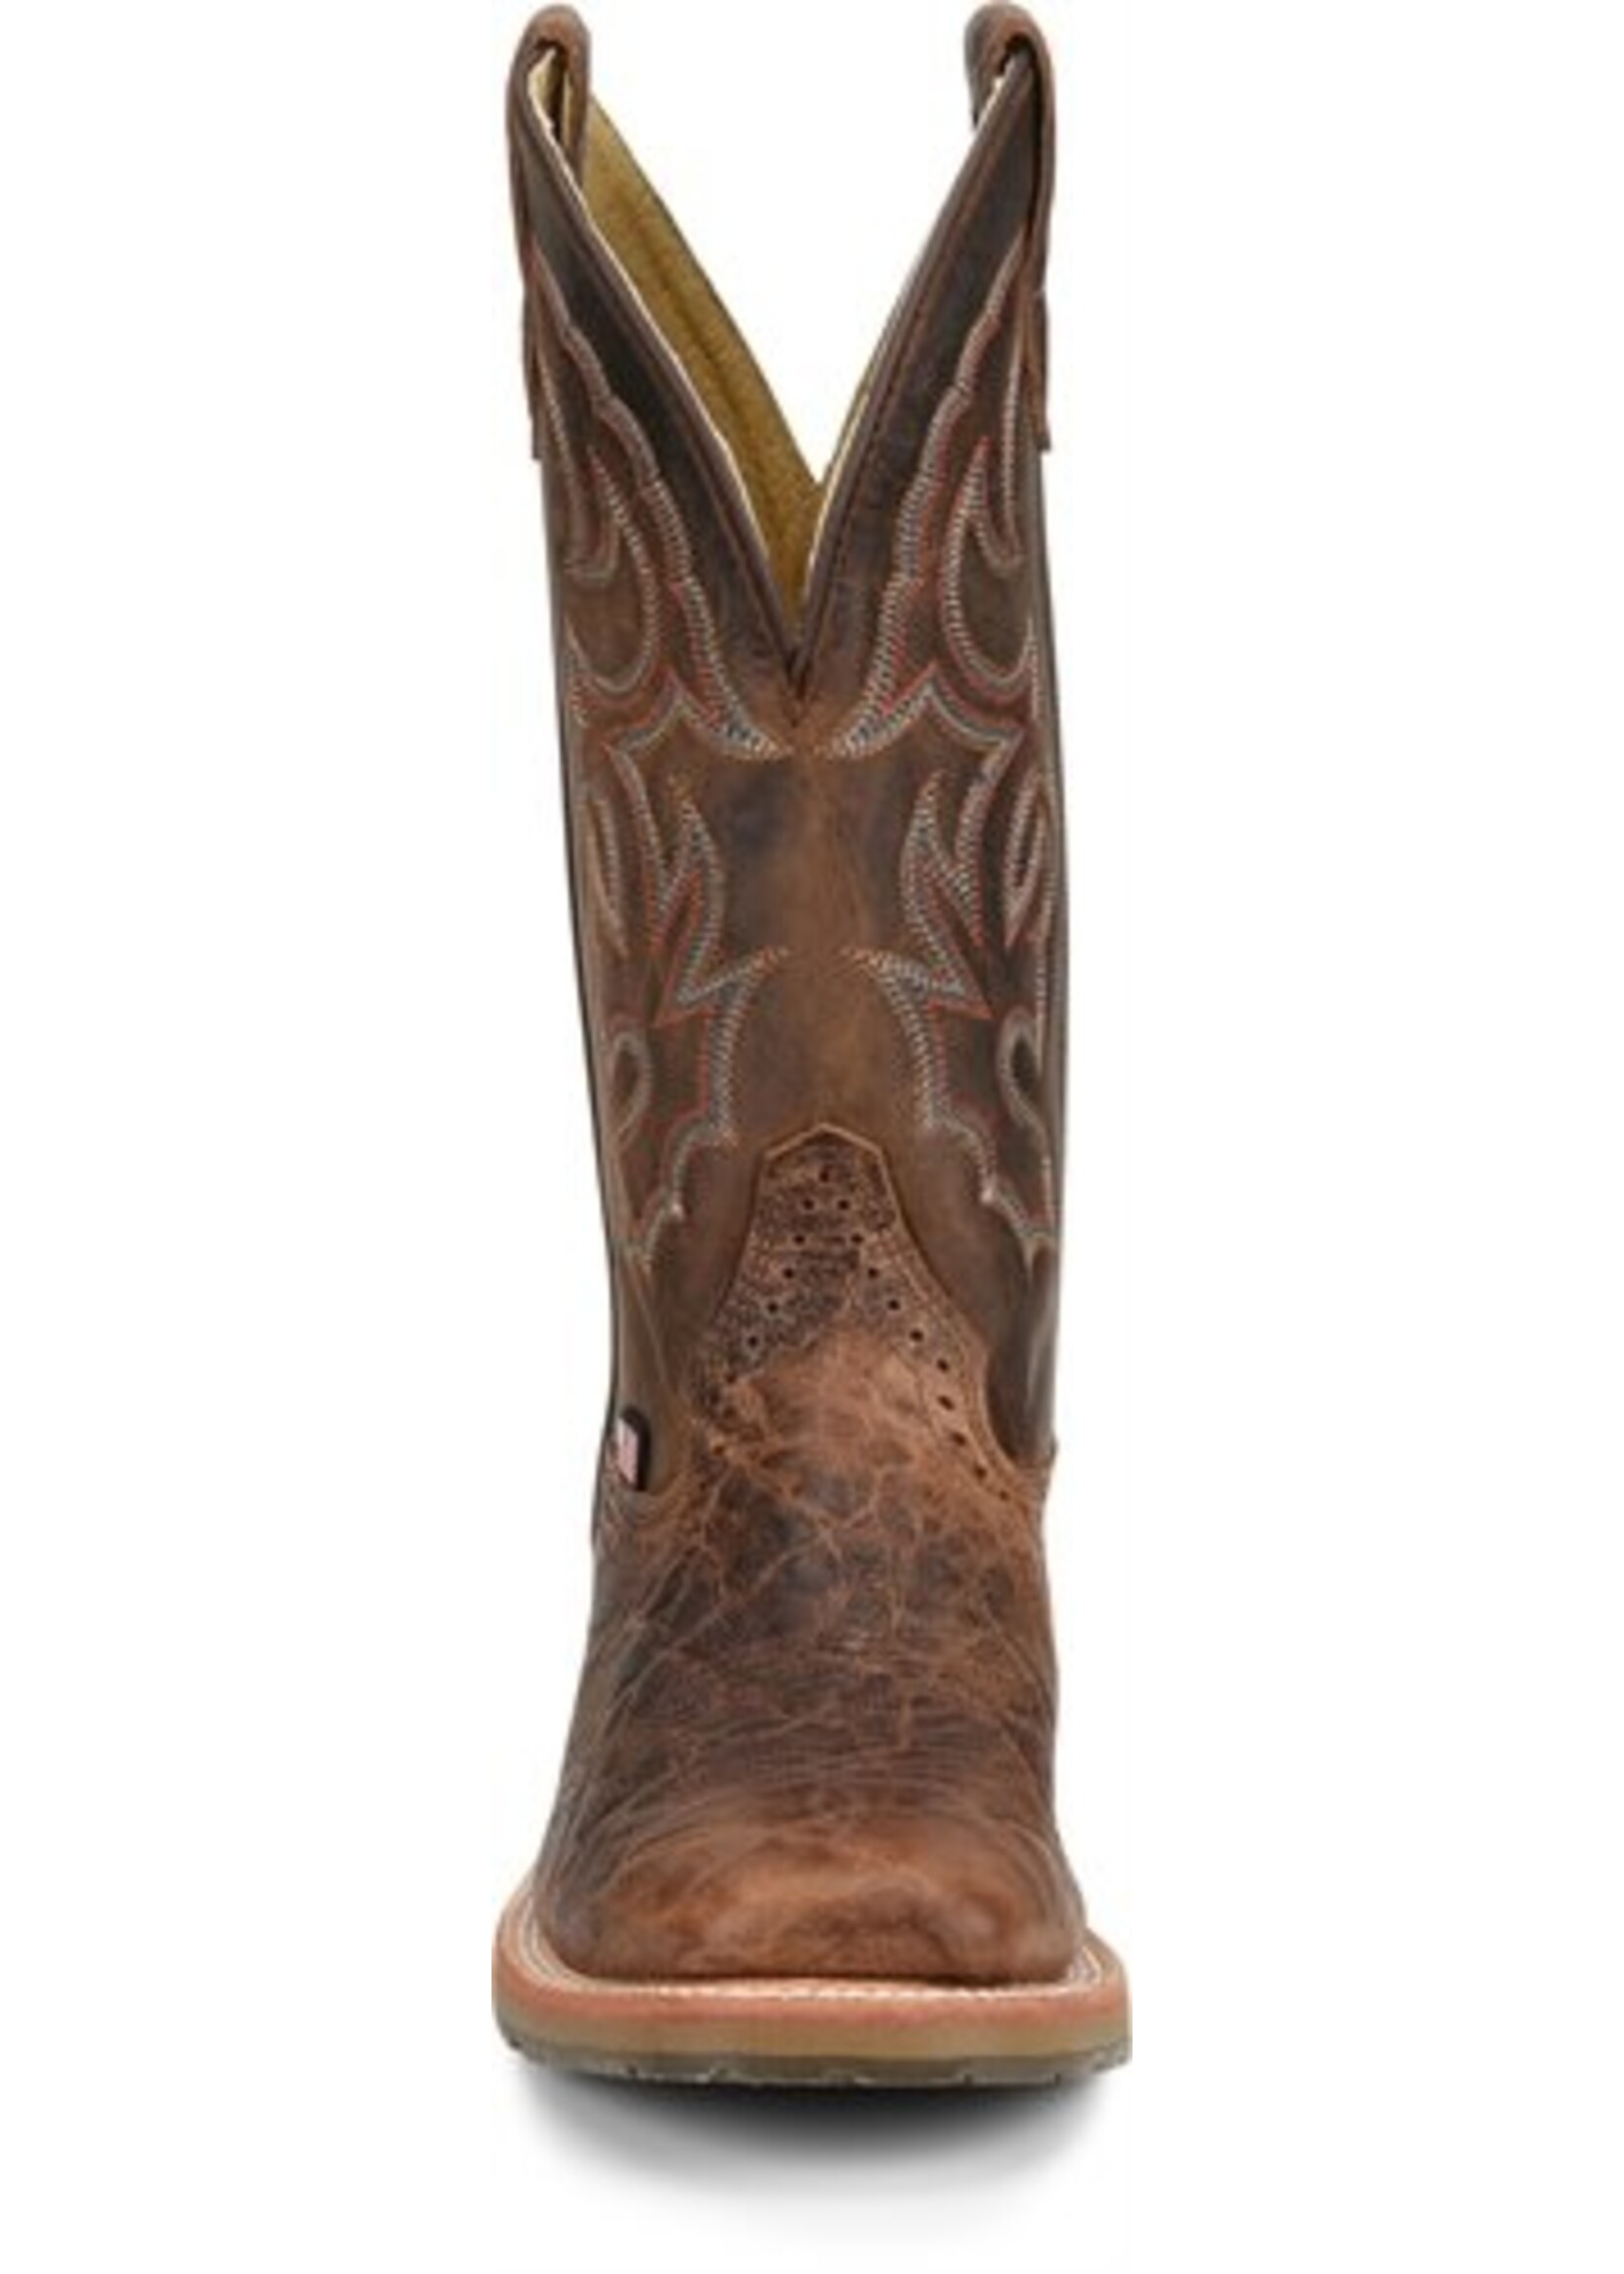 DOUBLE H Harshaw DH4645 - Hewlett & Dunn Boot and Jean Company